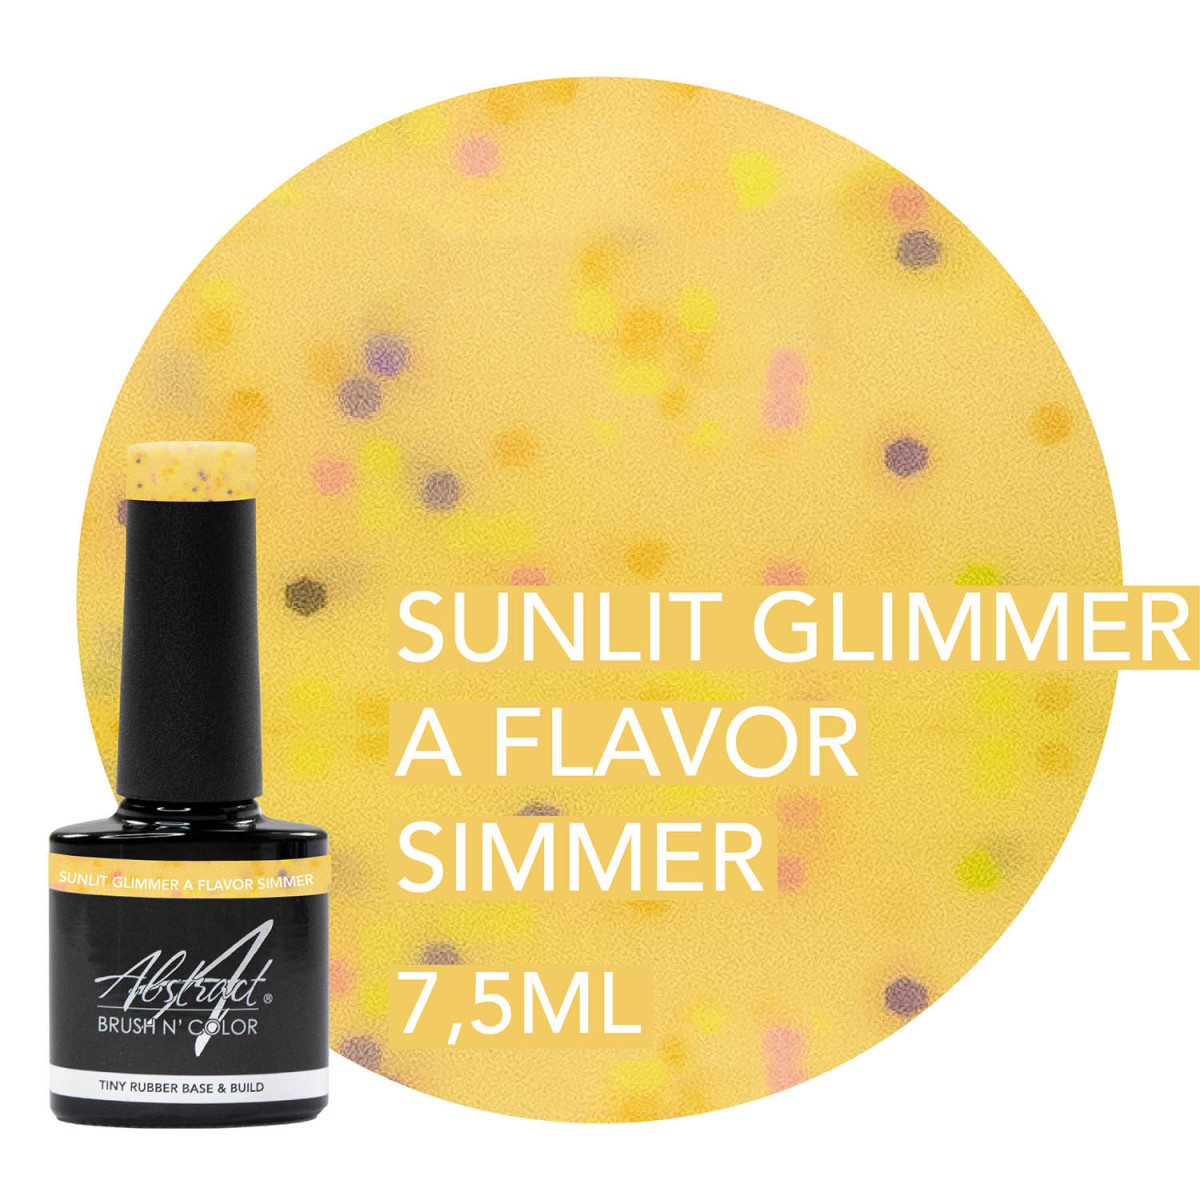 Sunlit Glimmer A Flavor Simmer - TINY Rubber Base & Build Gel Abstract